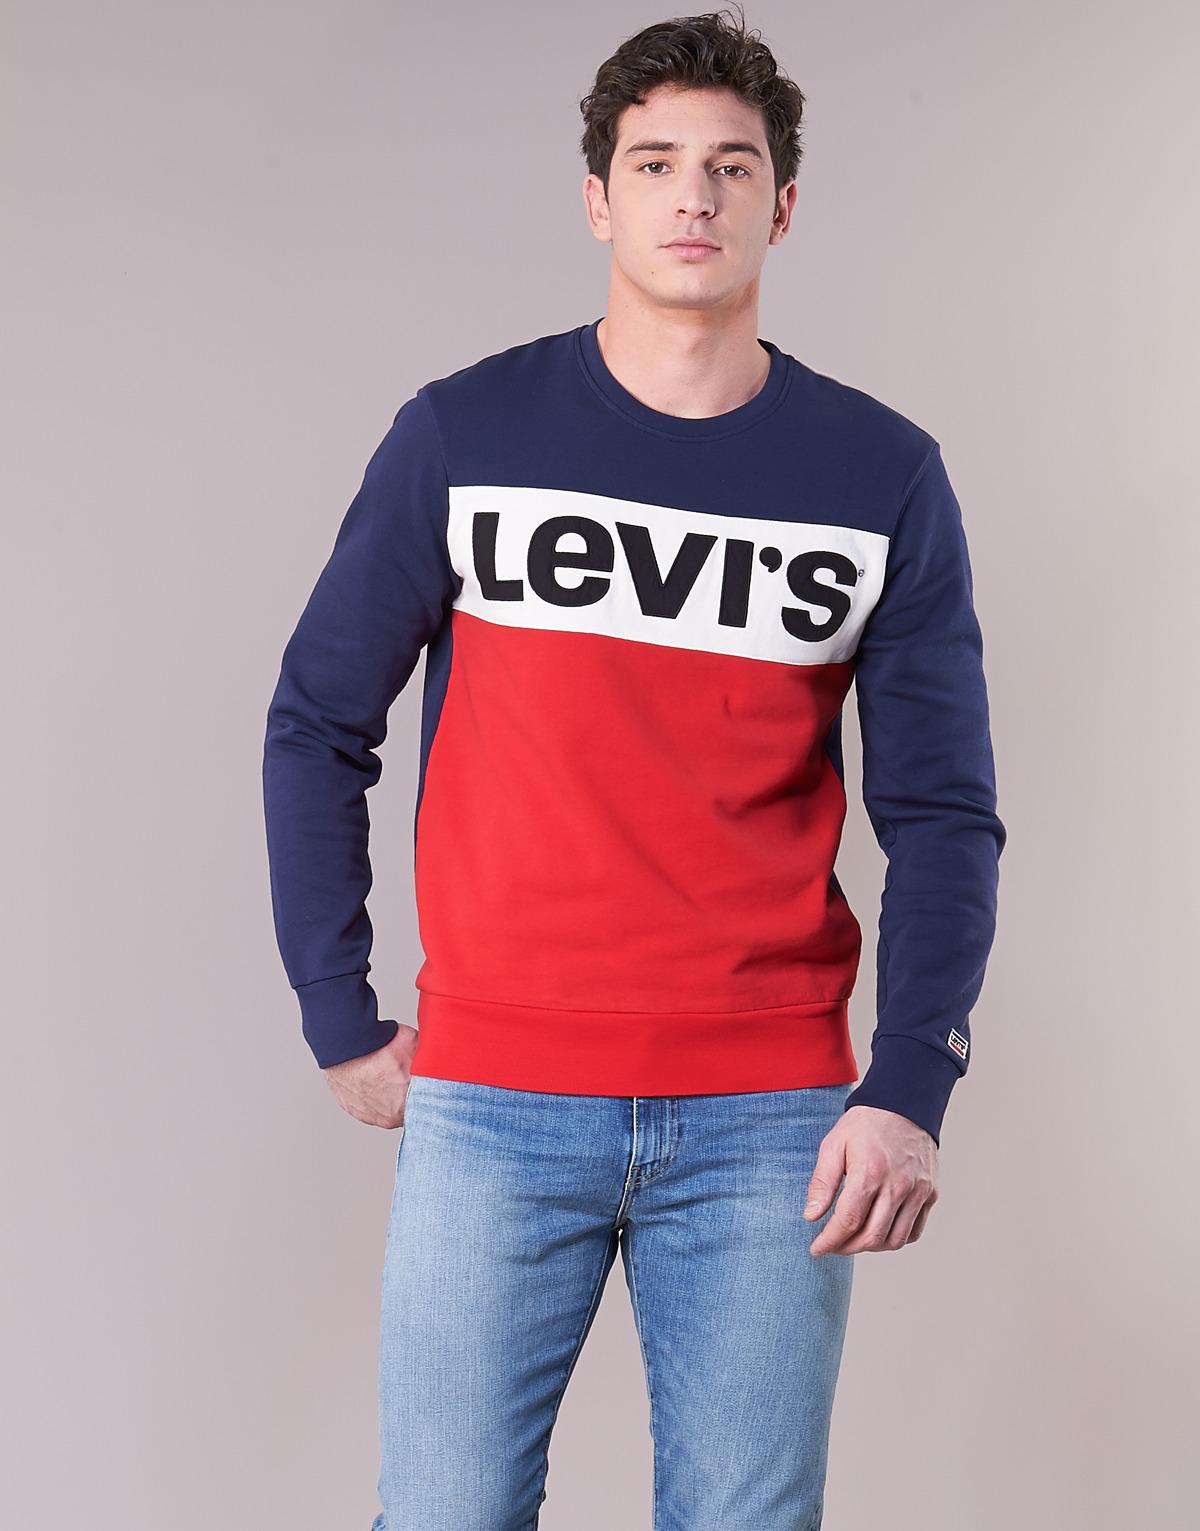 levi's red white and blue sweatshirt